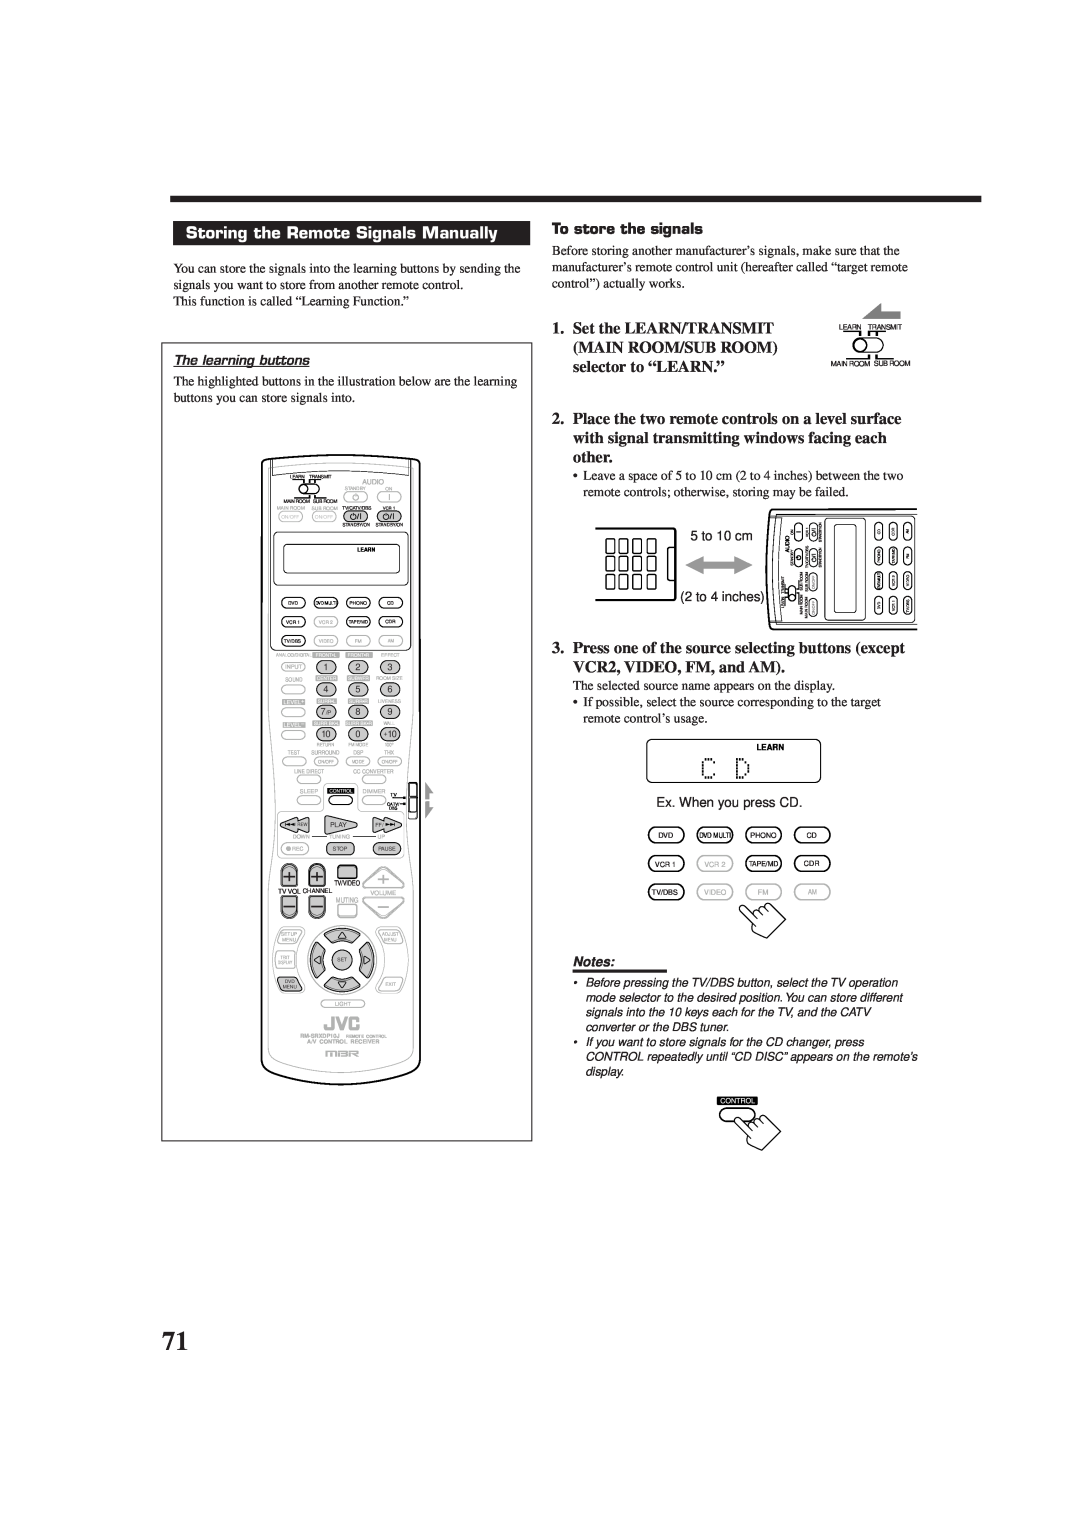 JVC RX-DP10VBK manual Storing the Remote Signals Manually, Set the LEARN/TRANSMIT, Main Room/Sub Room, selector to “LEARN.” 